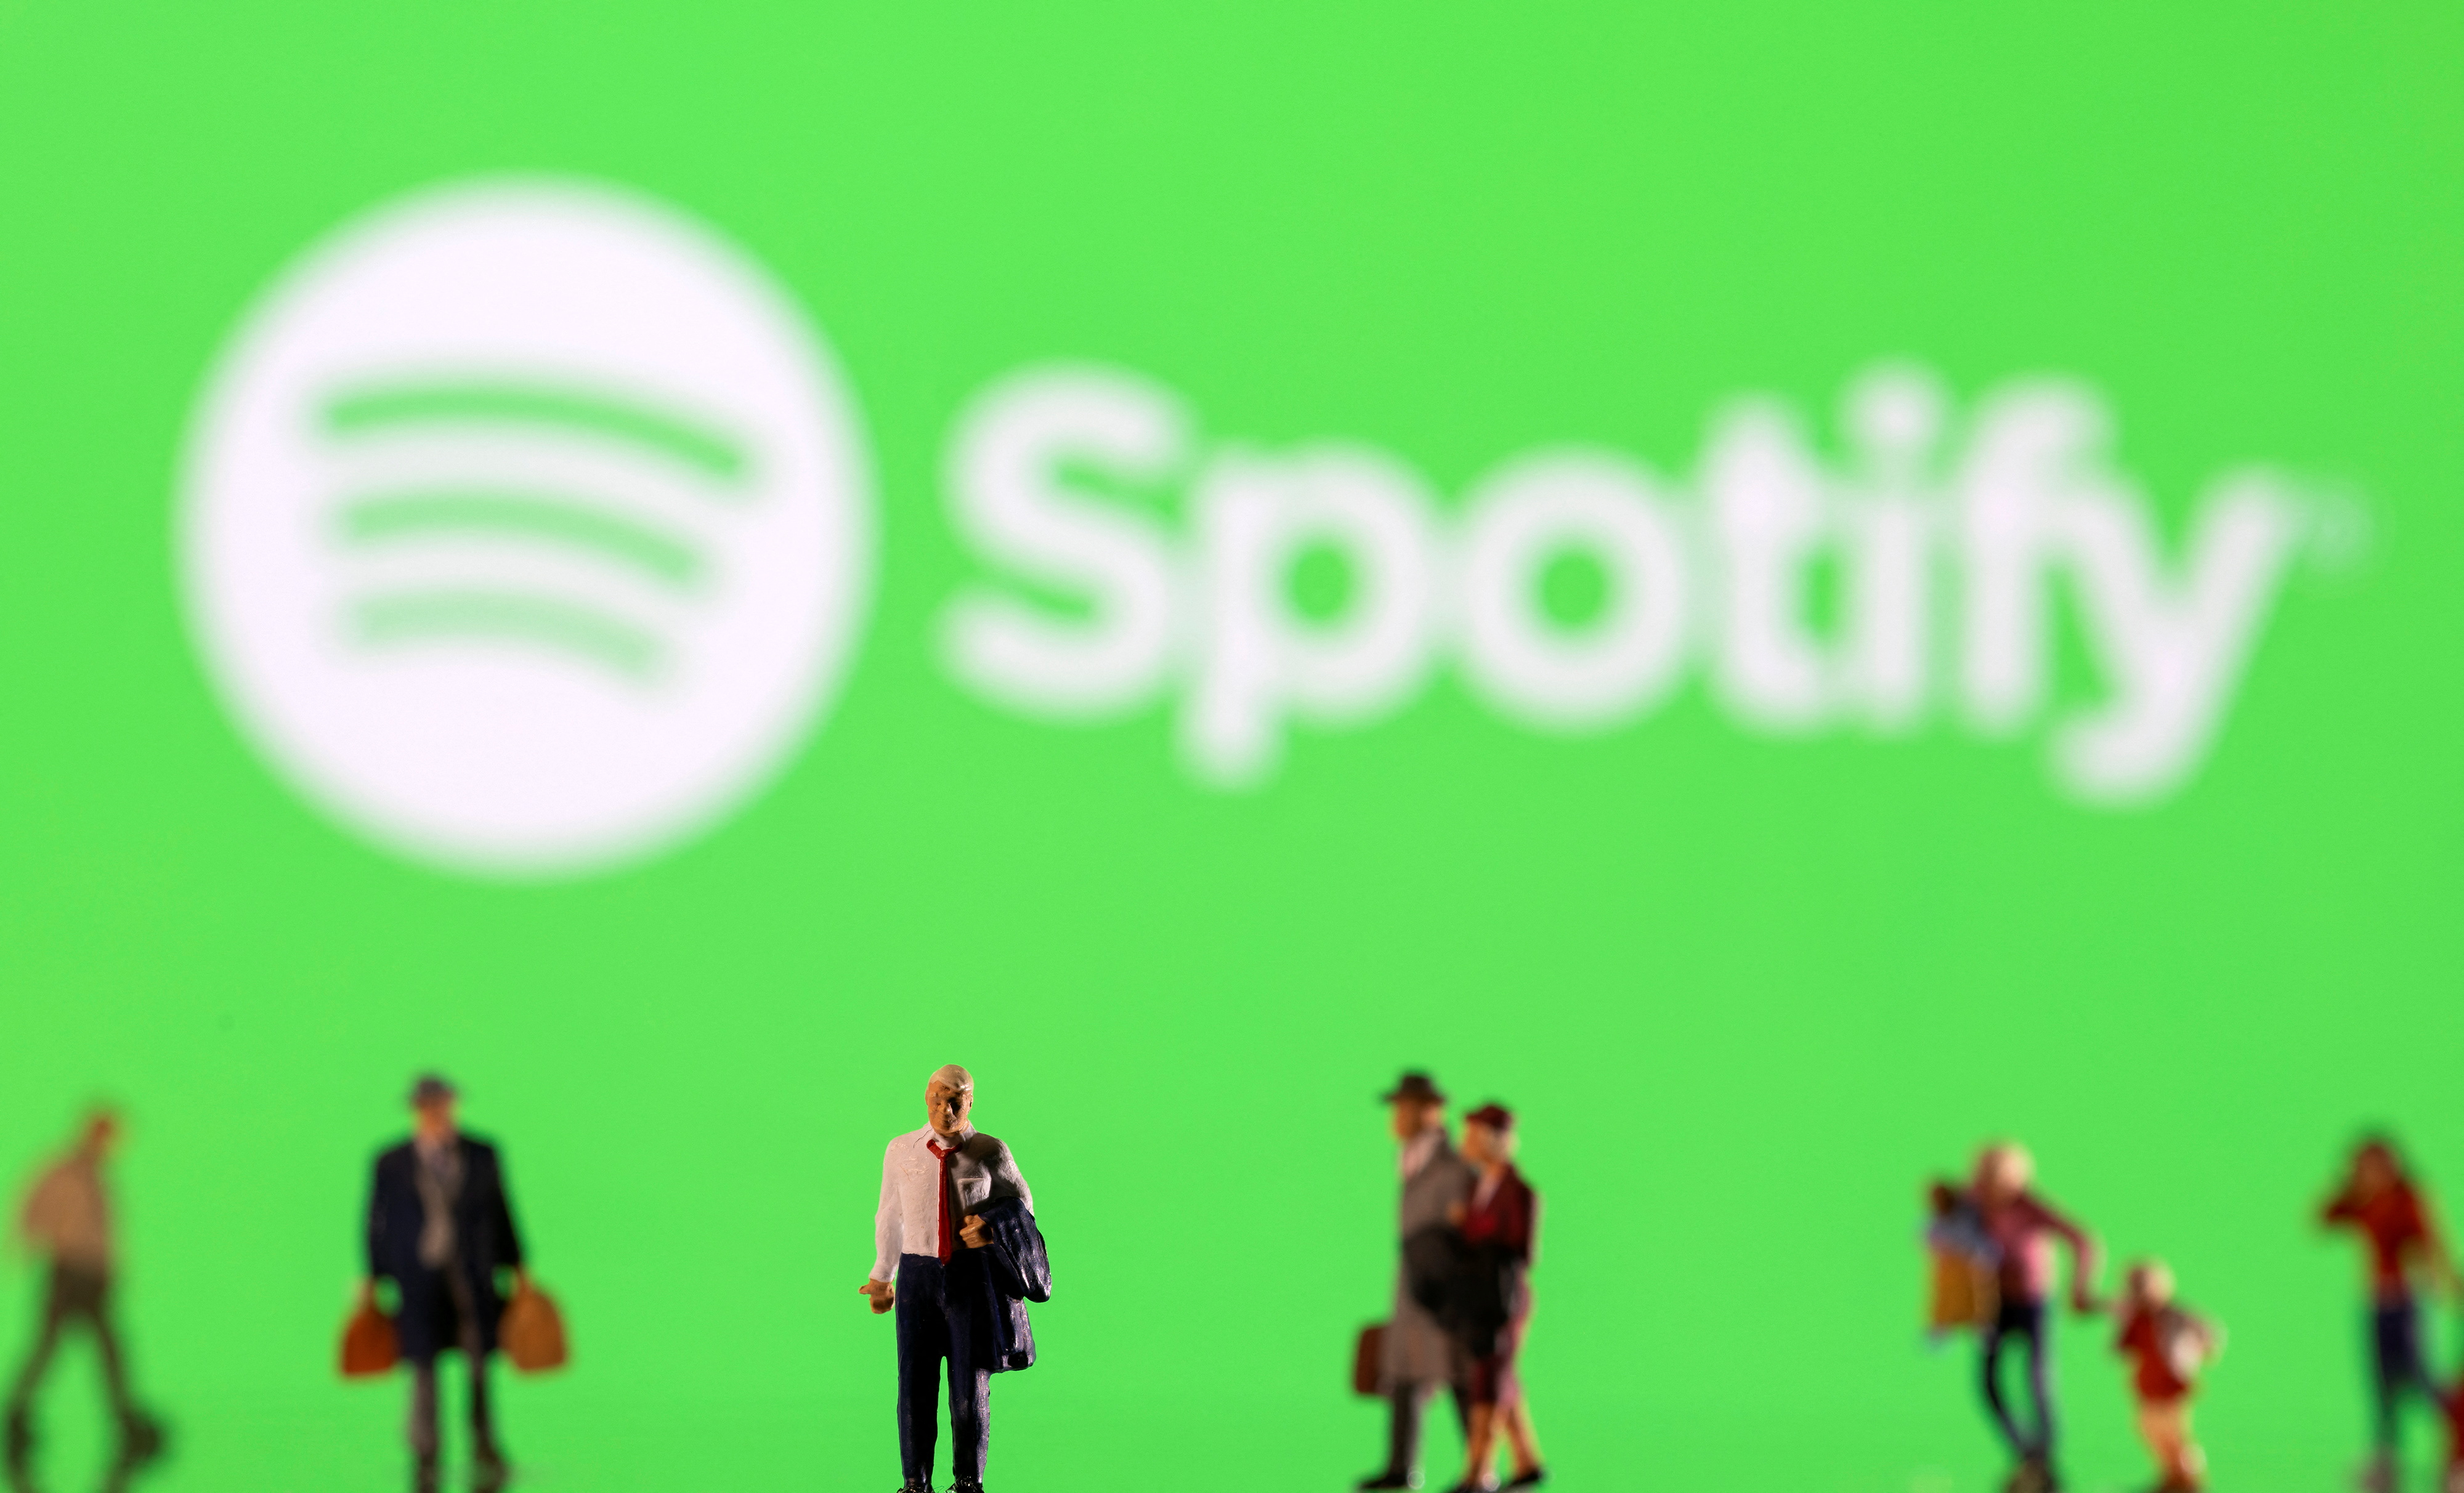 The illustration shows small figurines and the Spotify logo displayed